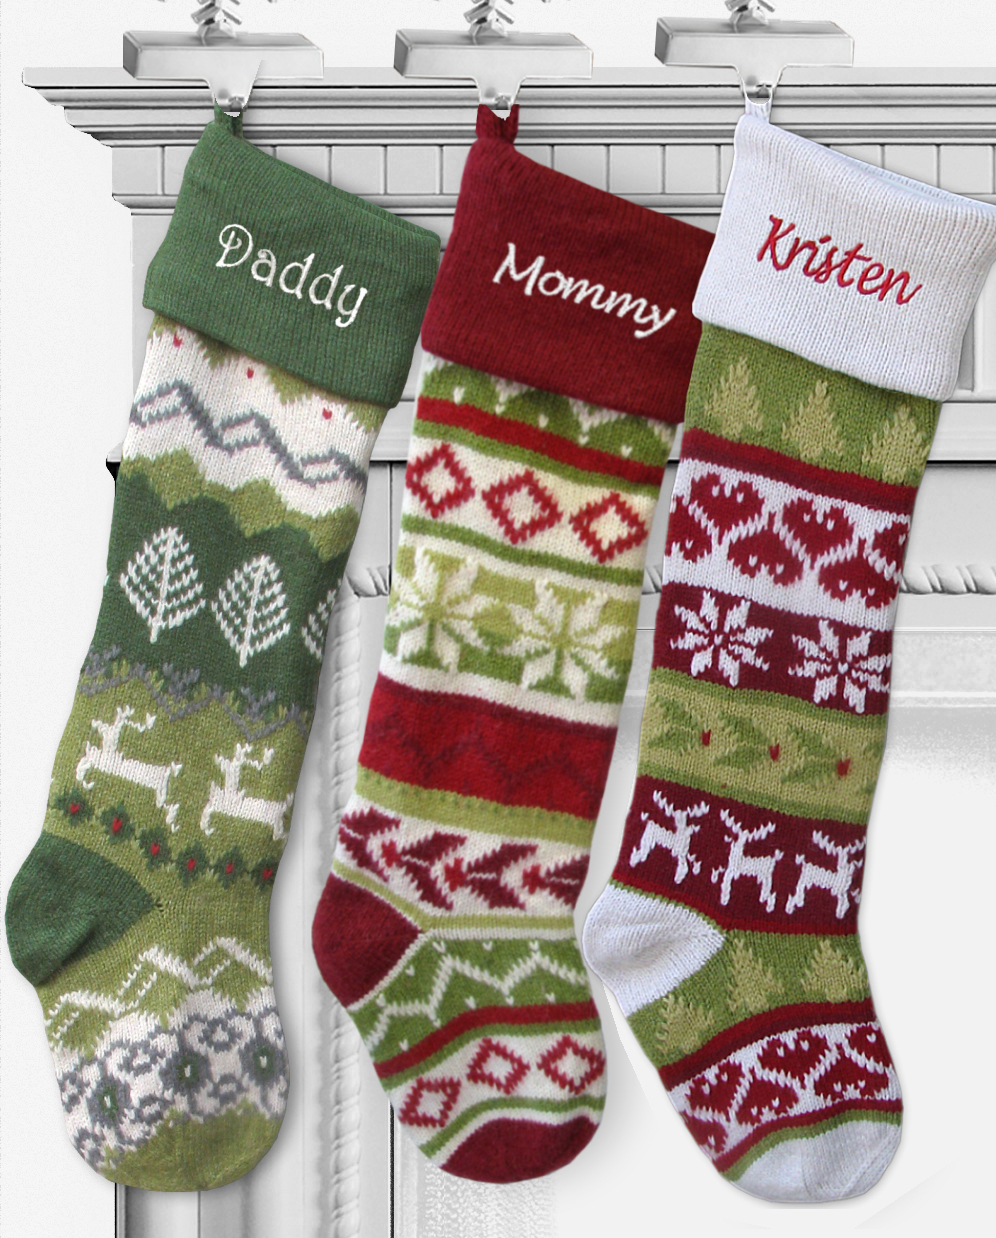 Knitted Christmas Stocking Patterns Personalized Knit Personalized Christmas Stockings Lookup Beforebuying